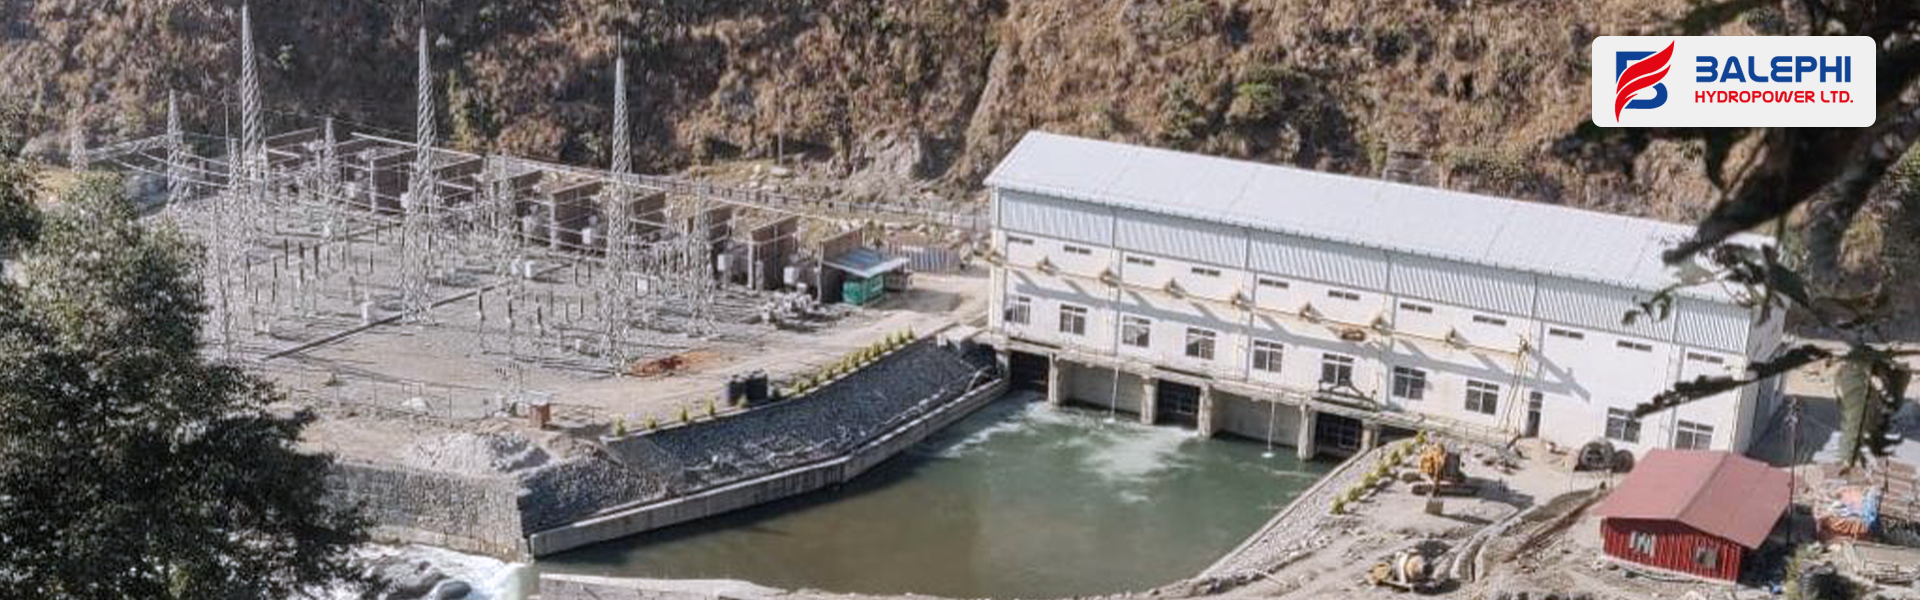 empowering-communities-and-pioneering-change-the-upper-balephi-a-hydropower-project